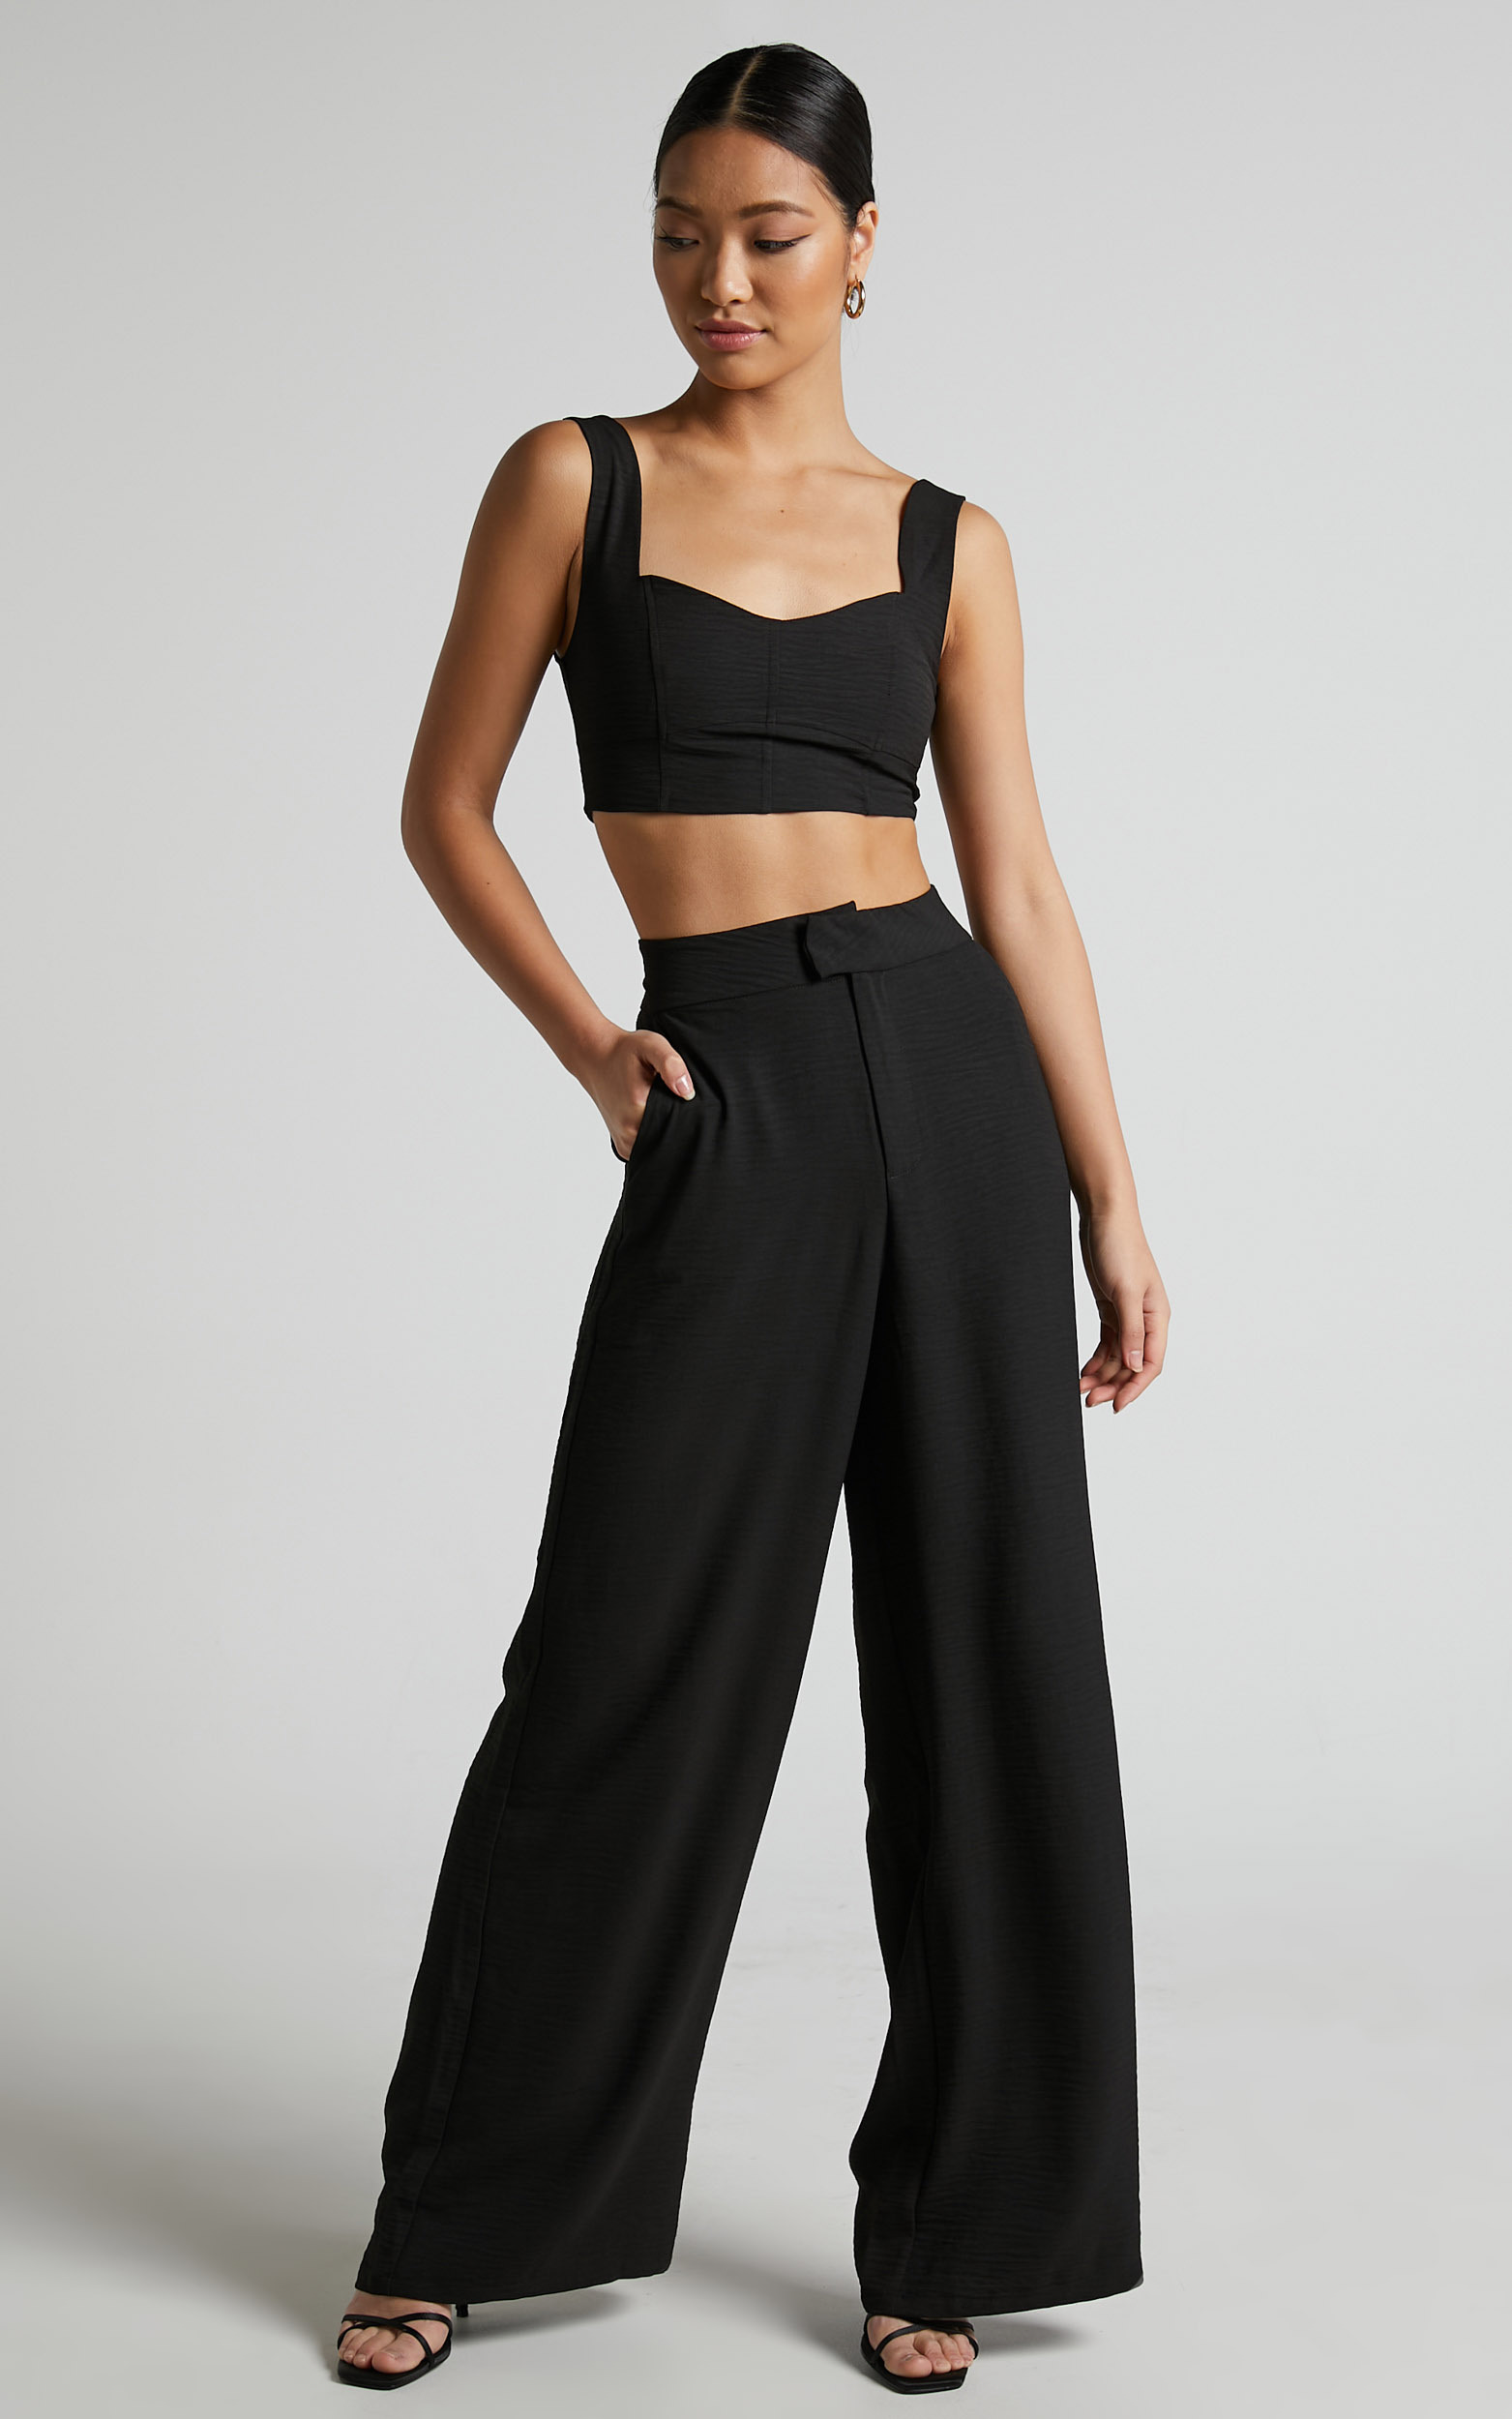 Loiuesa Two Piece Set - Crop Top and Wide Leg Pants in Black - 04, BLK1, hi-res image number null